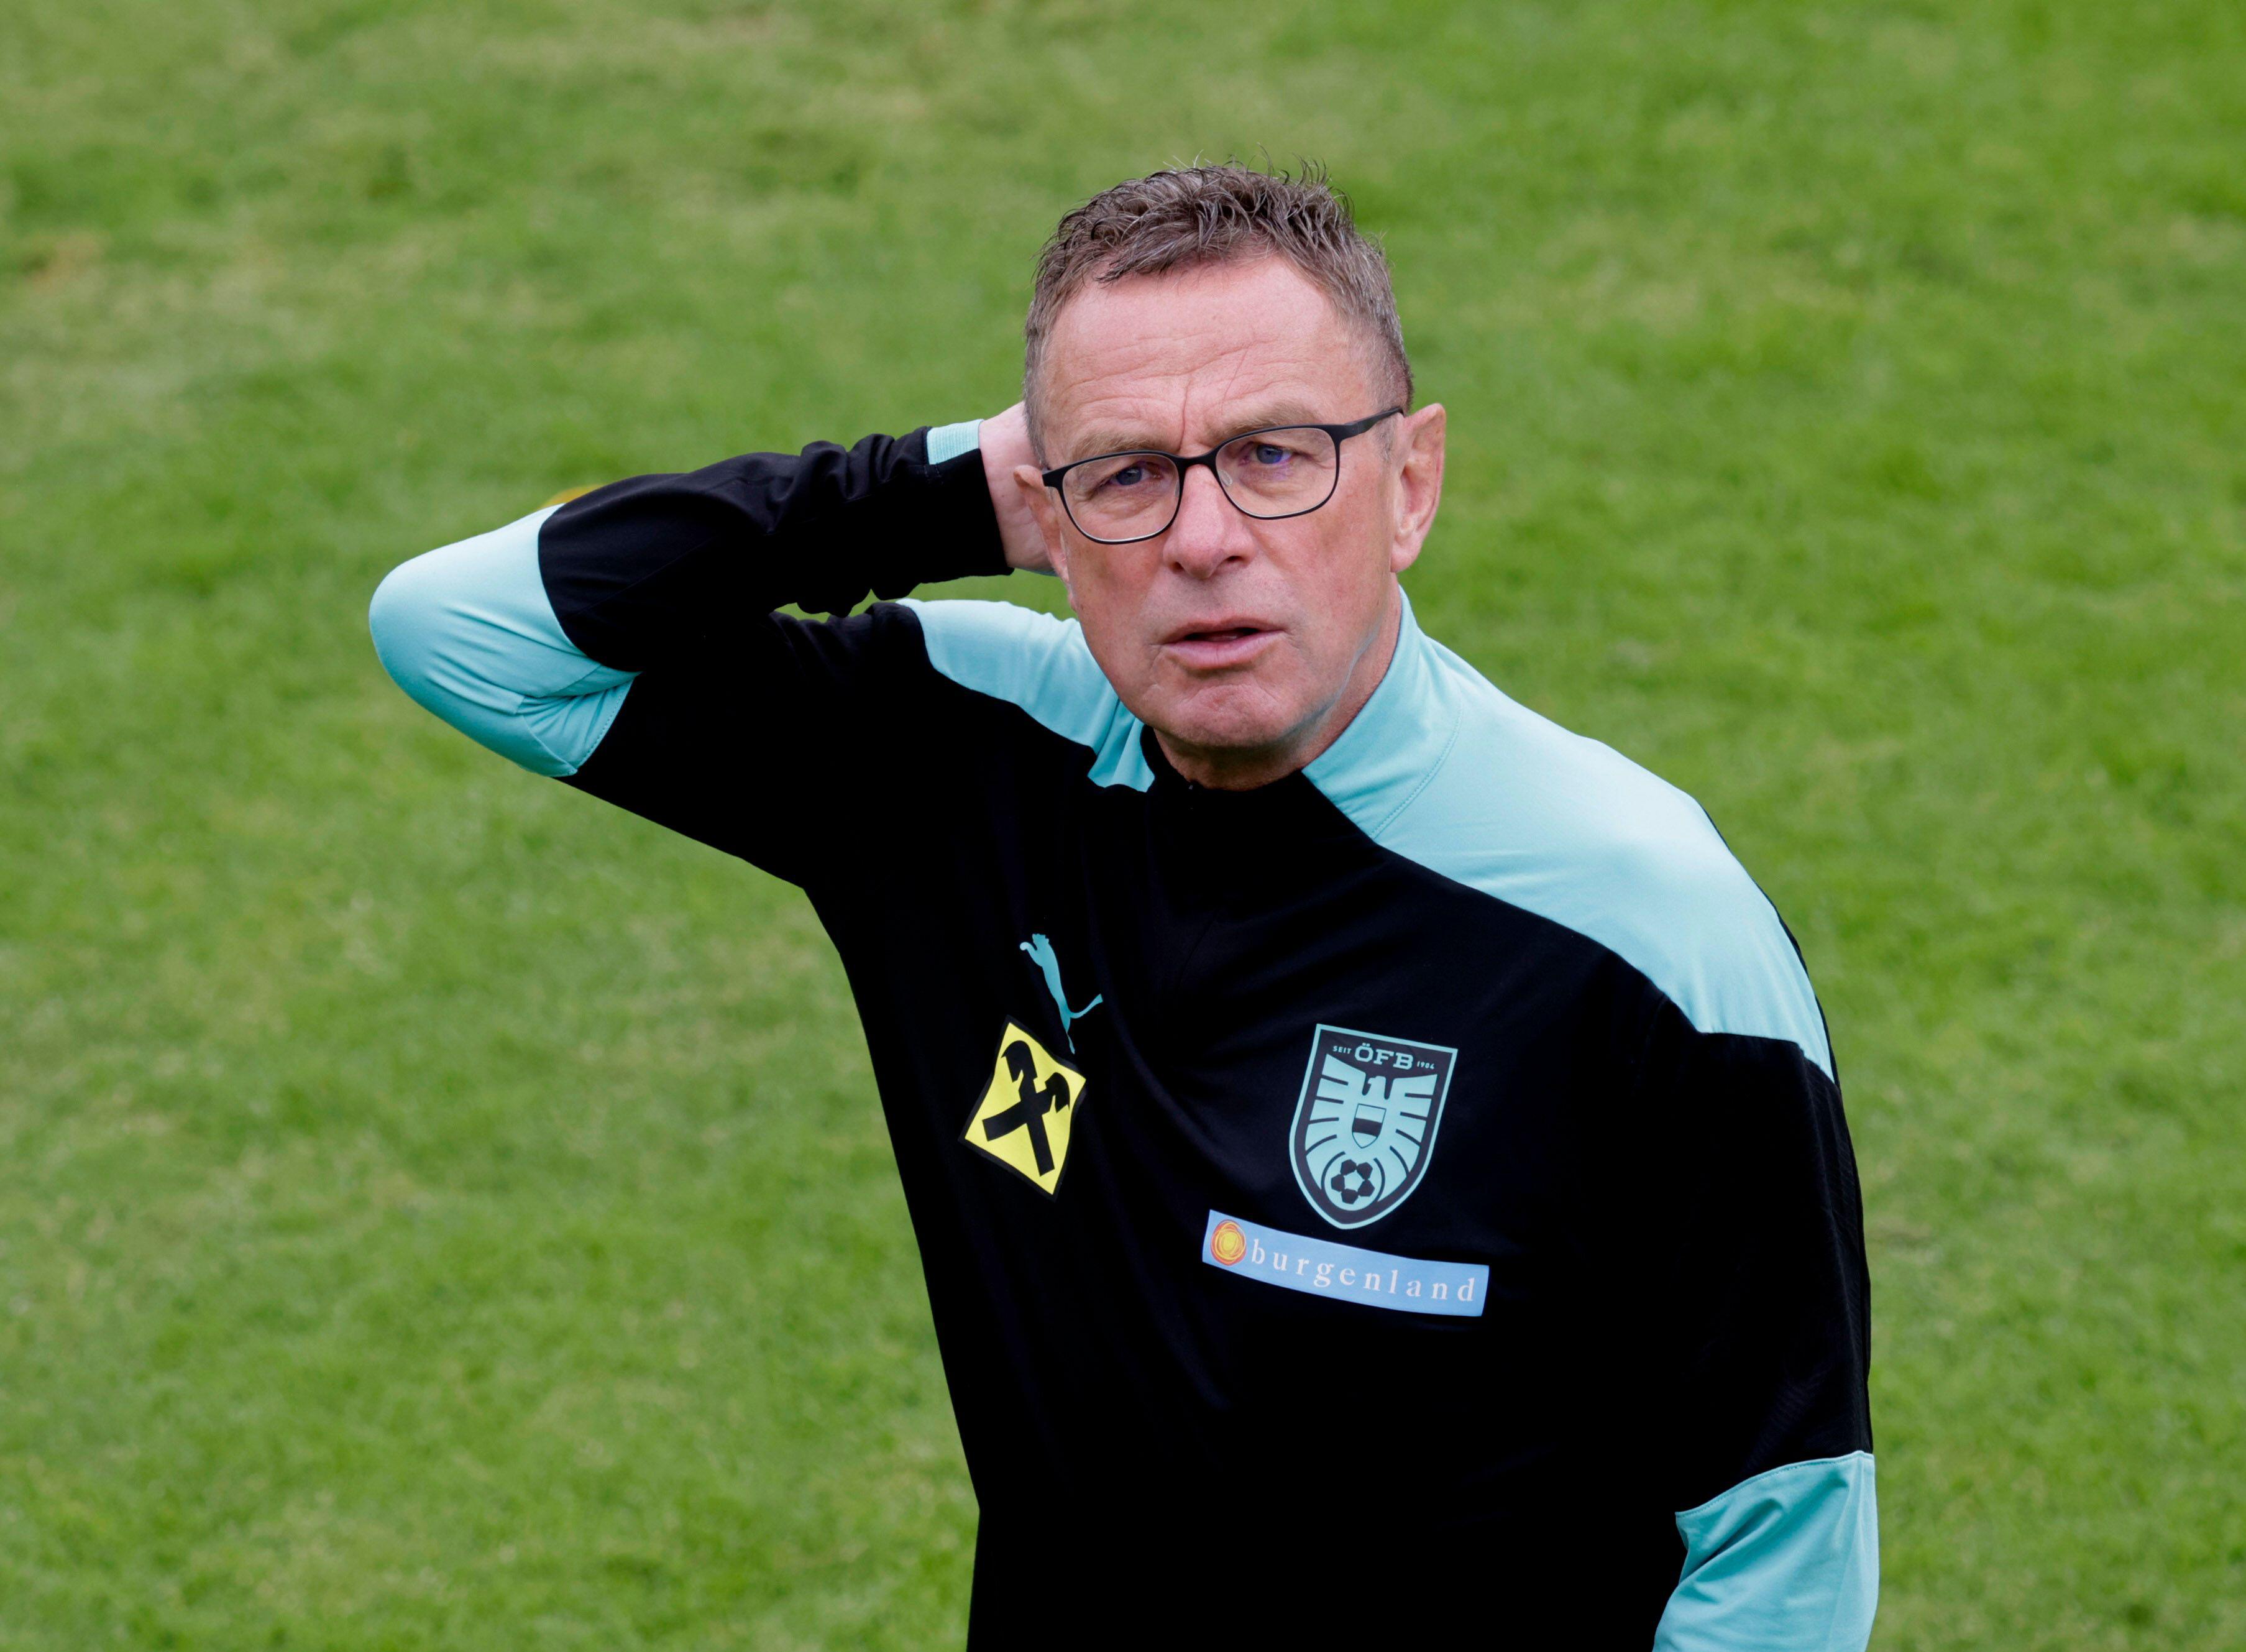 UEFA Nations League 2022/23: Ralf Rangnick READY to seal second win in UNL campaign against Eriksen's Denmark, Follow Austria vs Denmark LIVE Streaming: Check Team News, Predictions